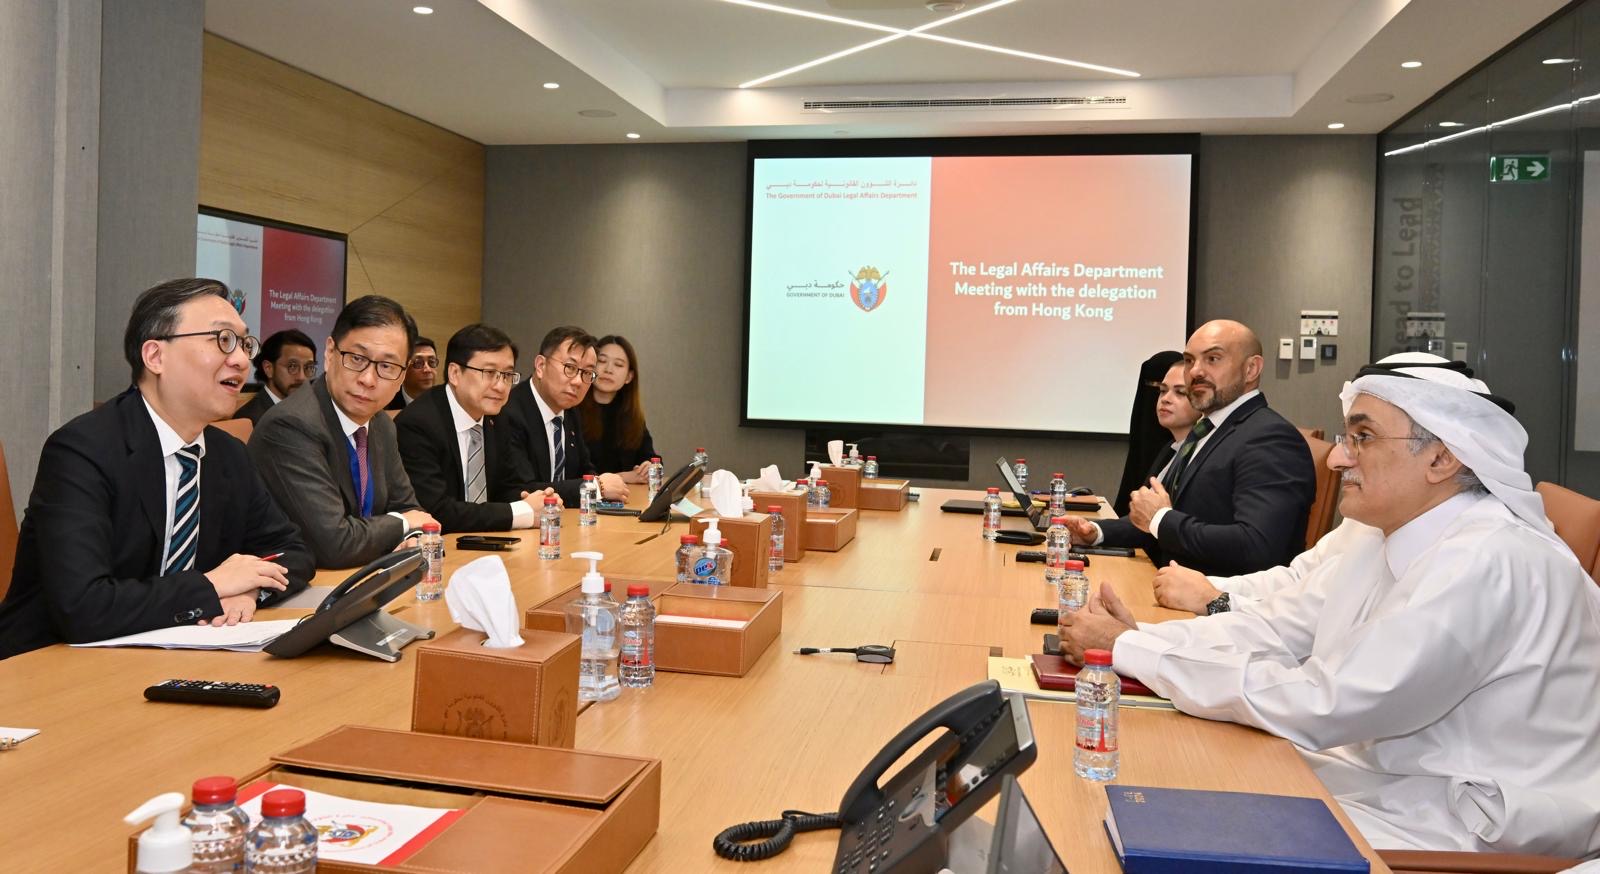 The Government of Dubai Legal Affairs Department receives the Secretary for Justice of Hong Kong to exchange experiences in regulating the legal profession